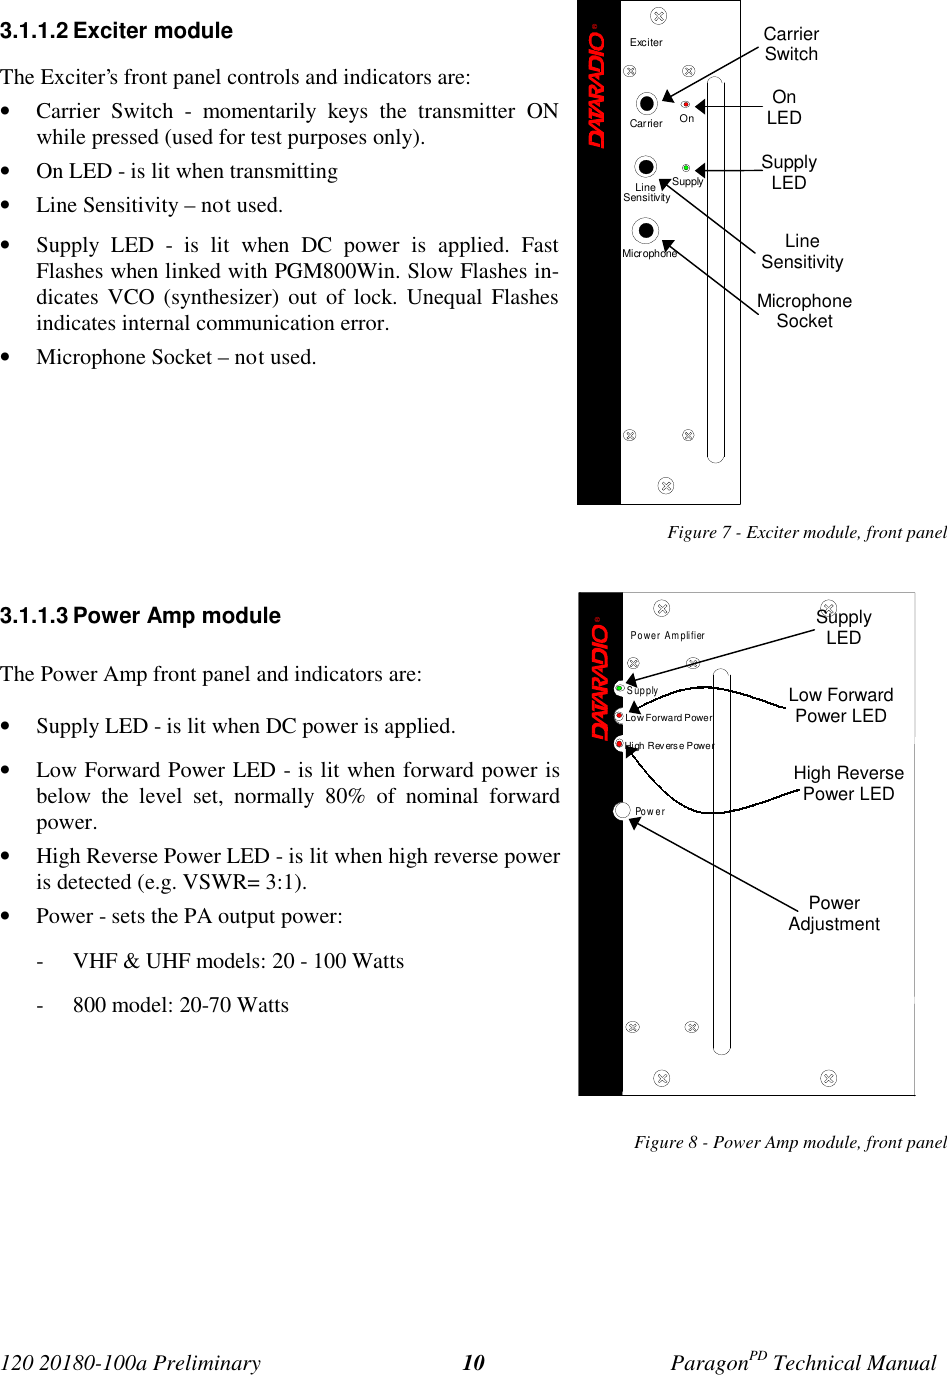 Page 17 of CalAmp Wireless Networks BDD4T85-1 Paragon/PD User Manual Parg PD  T100a Prelim